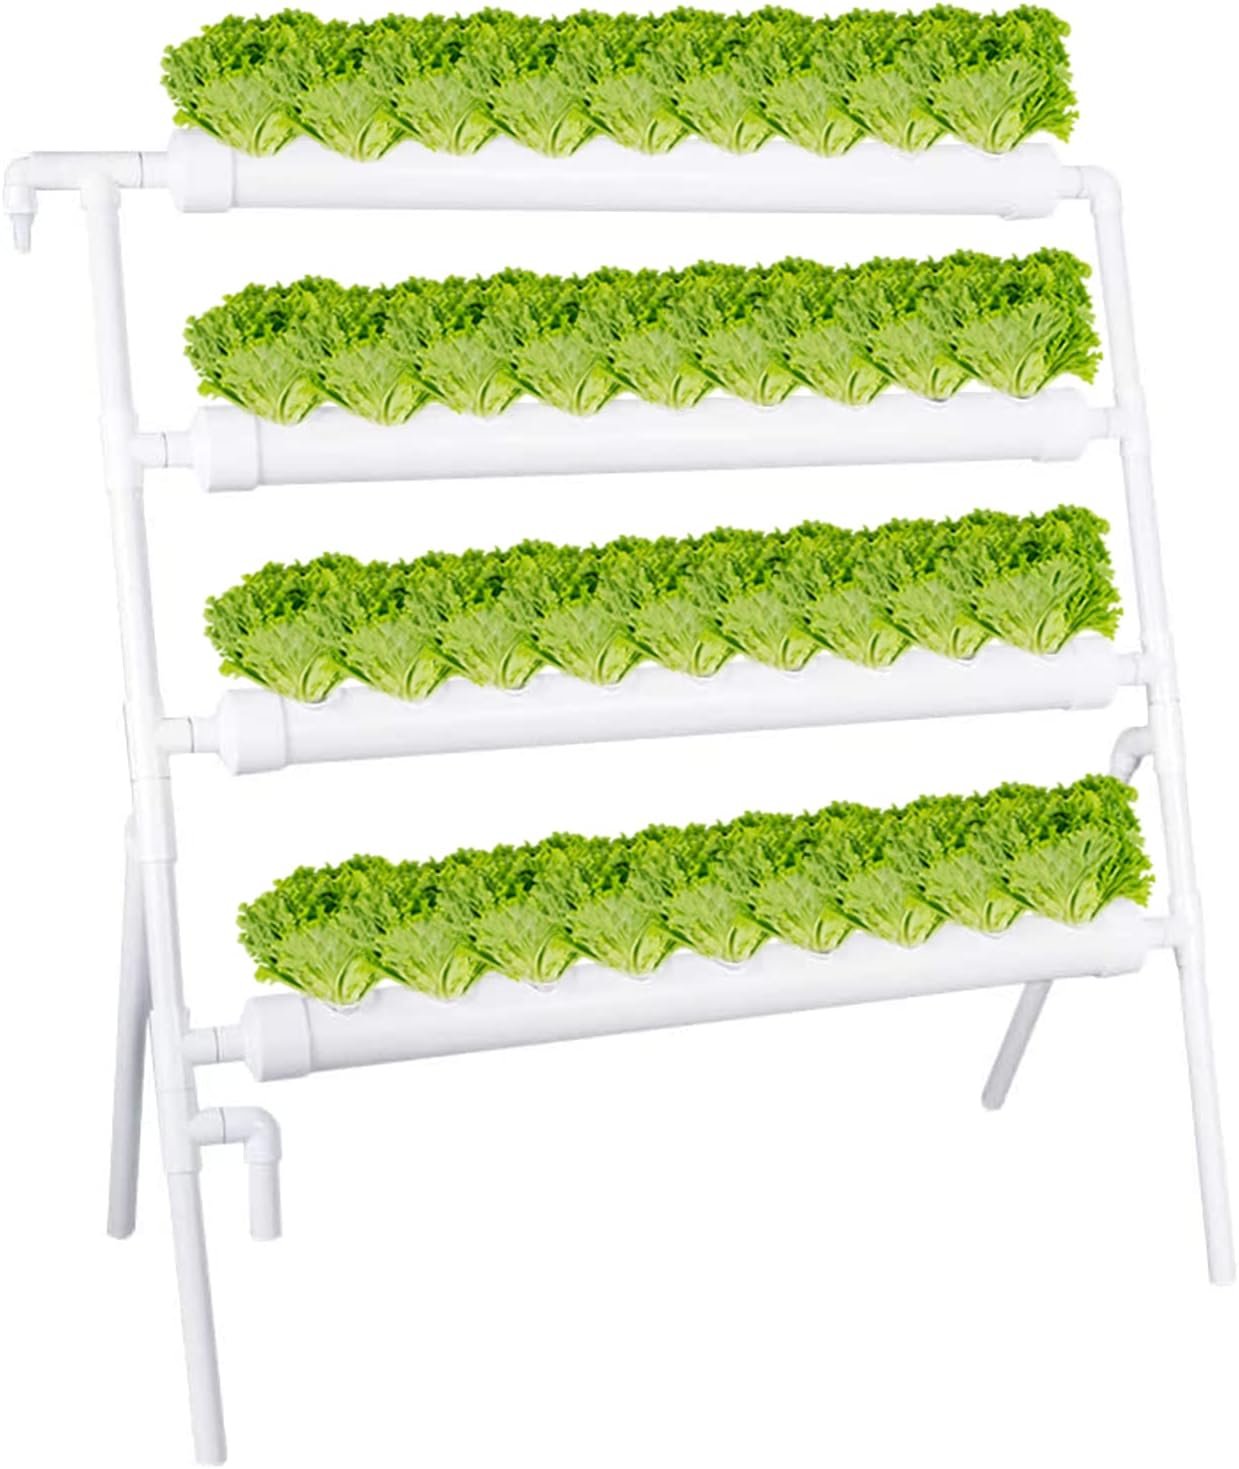 LAPOND Hydroponic Grow Kit Hydroponics Growing System 36 Plant Sites Vegetable Tool Grow Kit Hydroponic Planting Equipment with Water Pump, Pump Timer for Leafy Vegetable